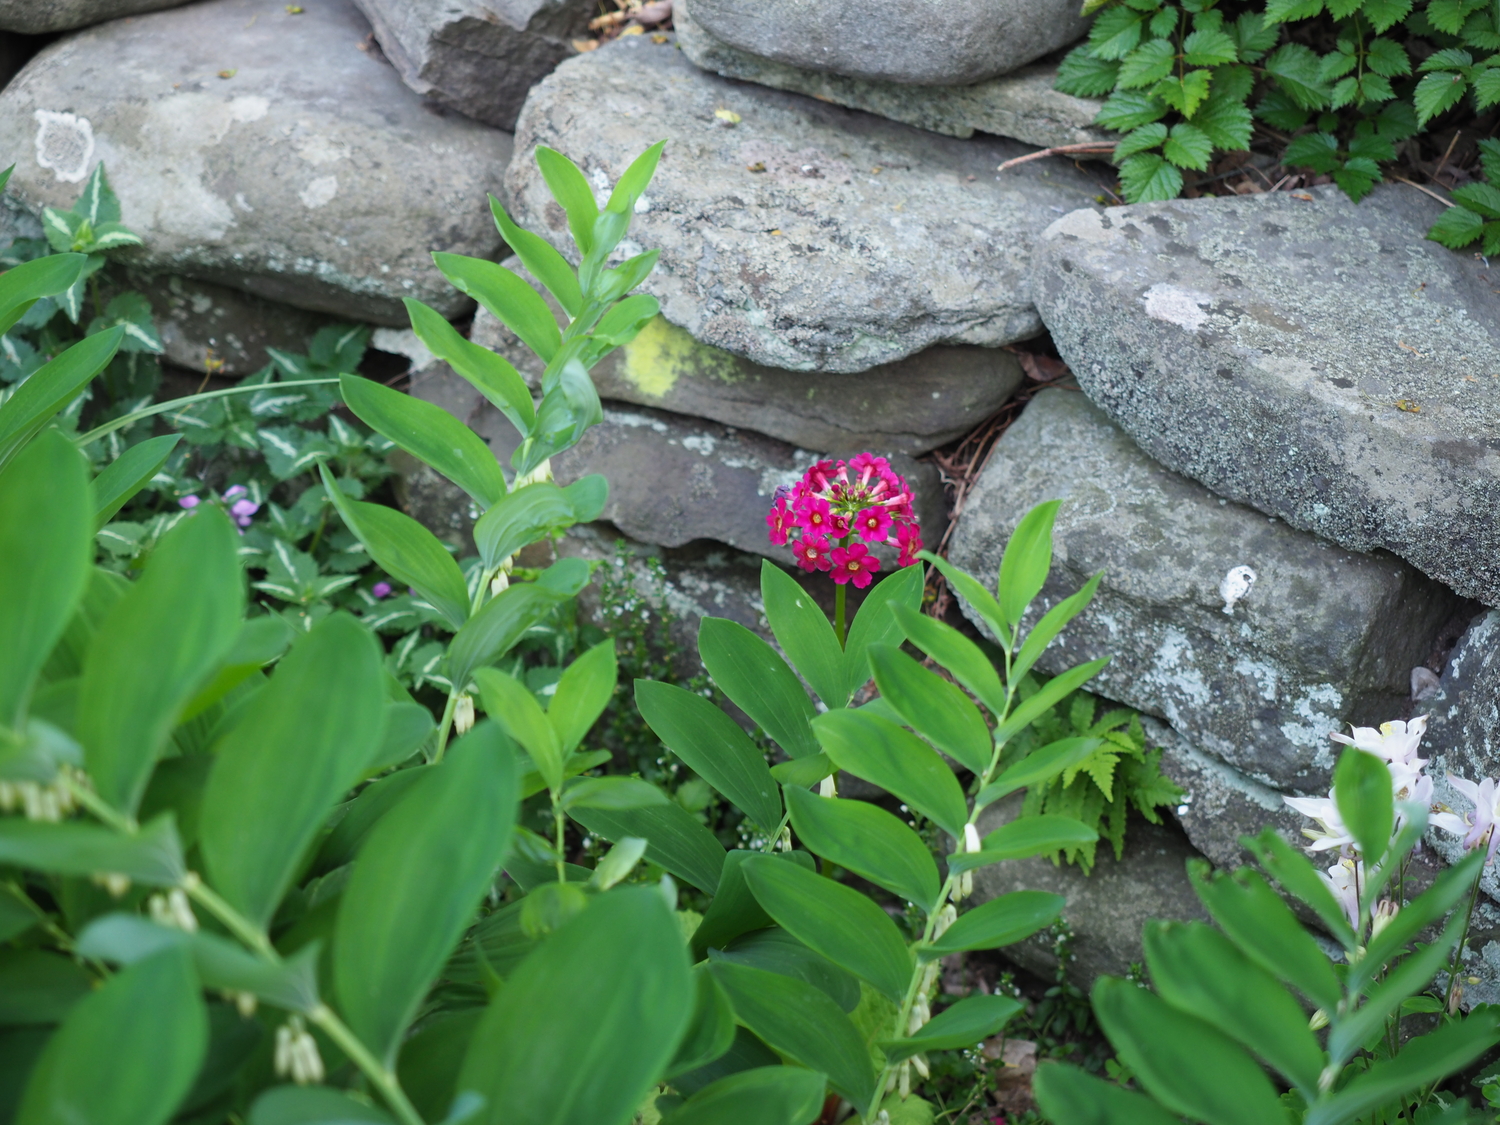 Hidden behind some Polygonatum (Solomon’s seal) is a single stalk of Primula Bee’s Ruby. It’s surprises like this that make the perennial gardens that aren’t over weeded full of surprises.
ANDREW MESSINGER